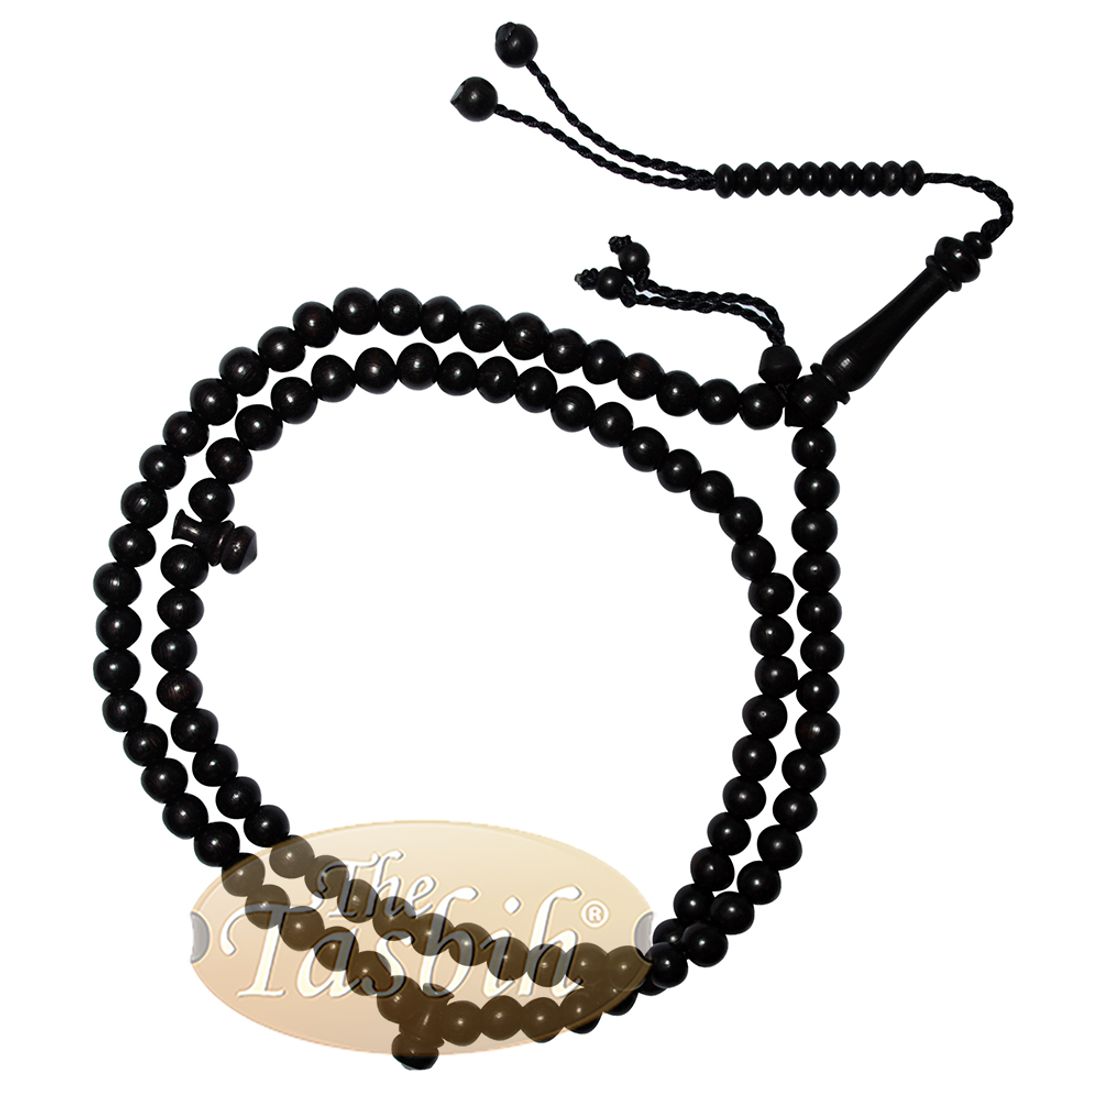 Prayer Beads Tasbih Necklace – Handcrafted Dyed Tamarind Wood 99-beads with Wood Stops